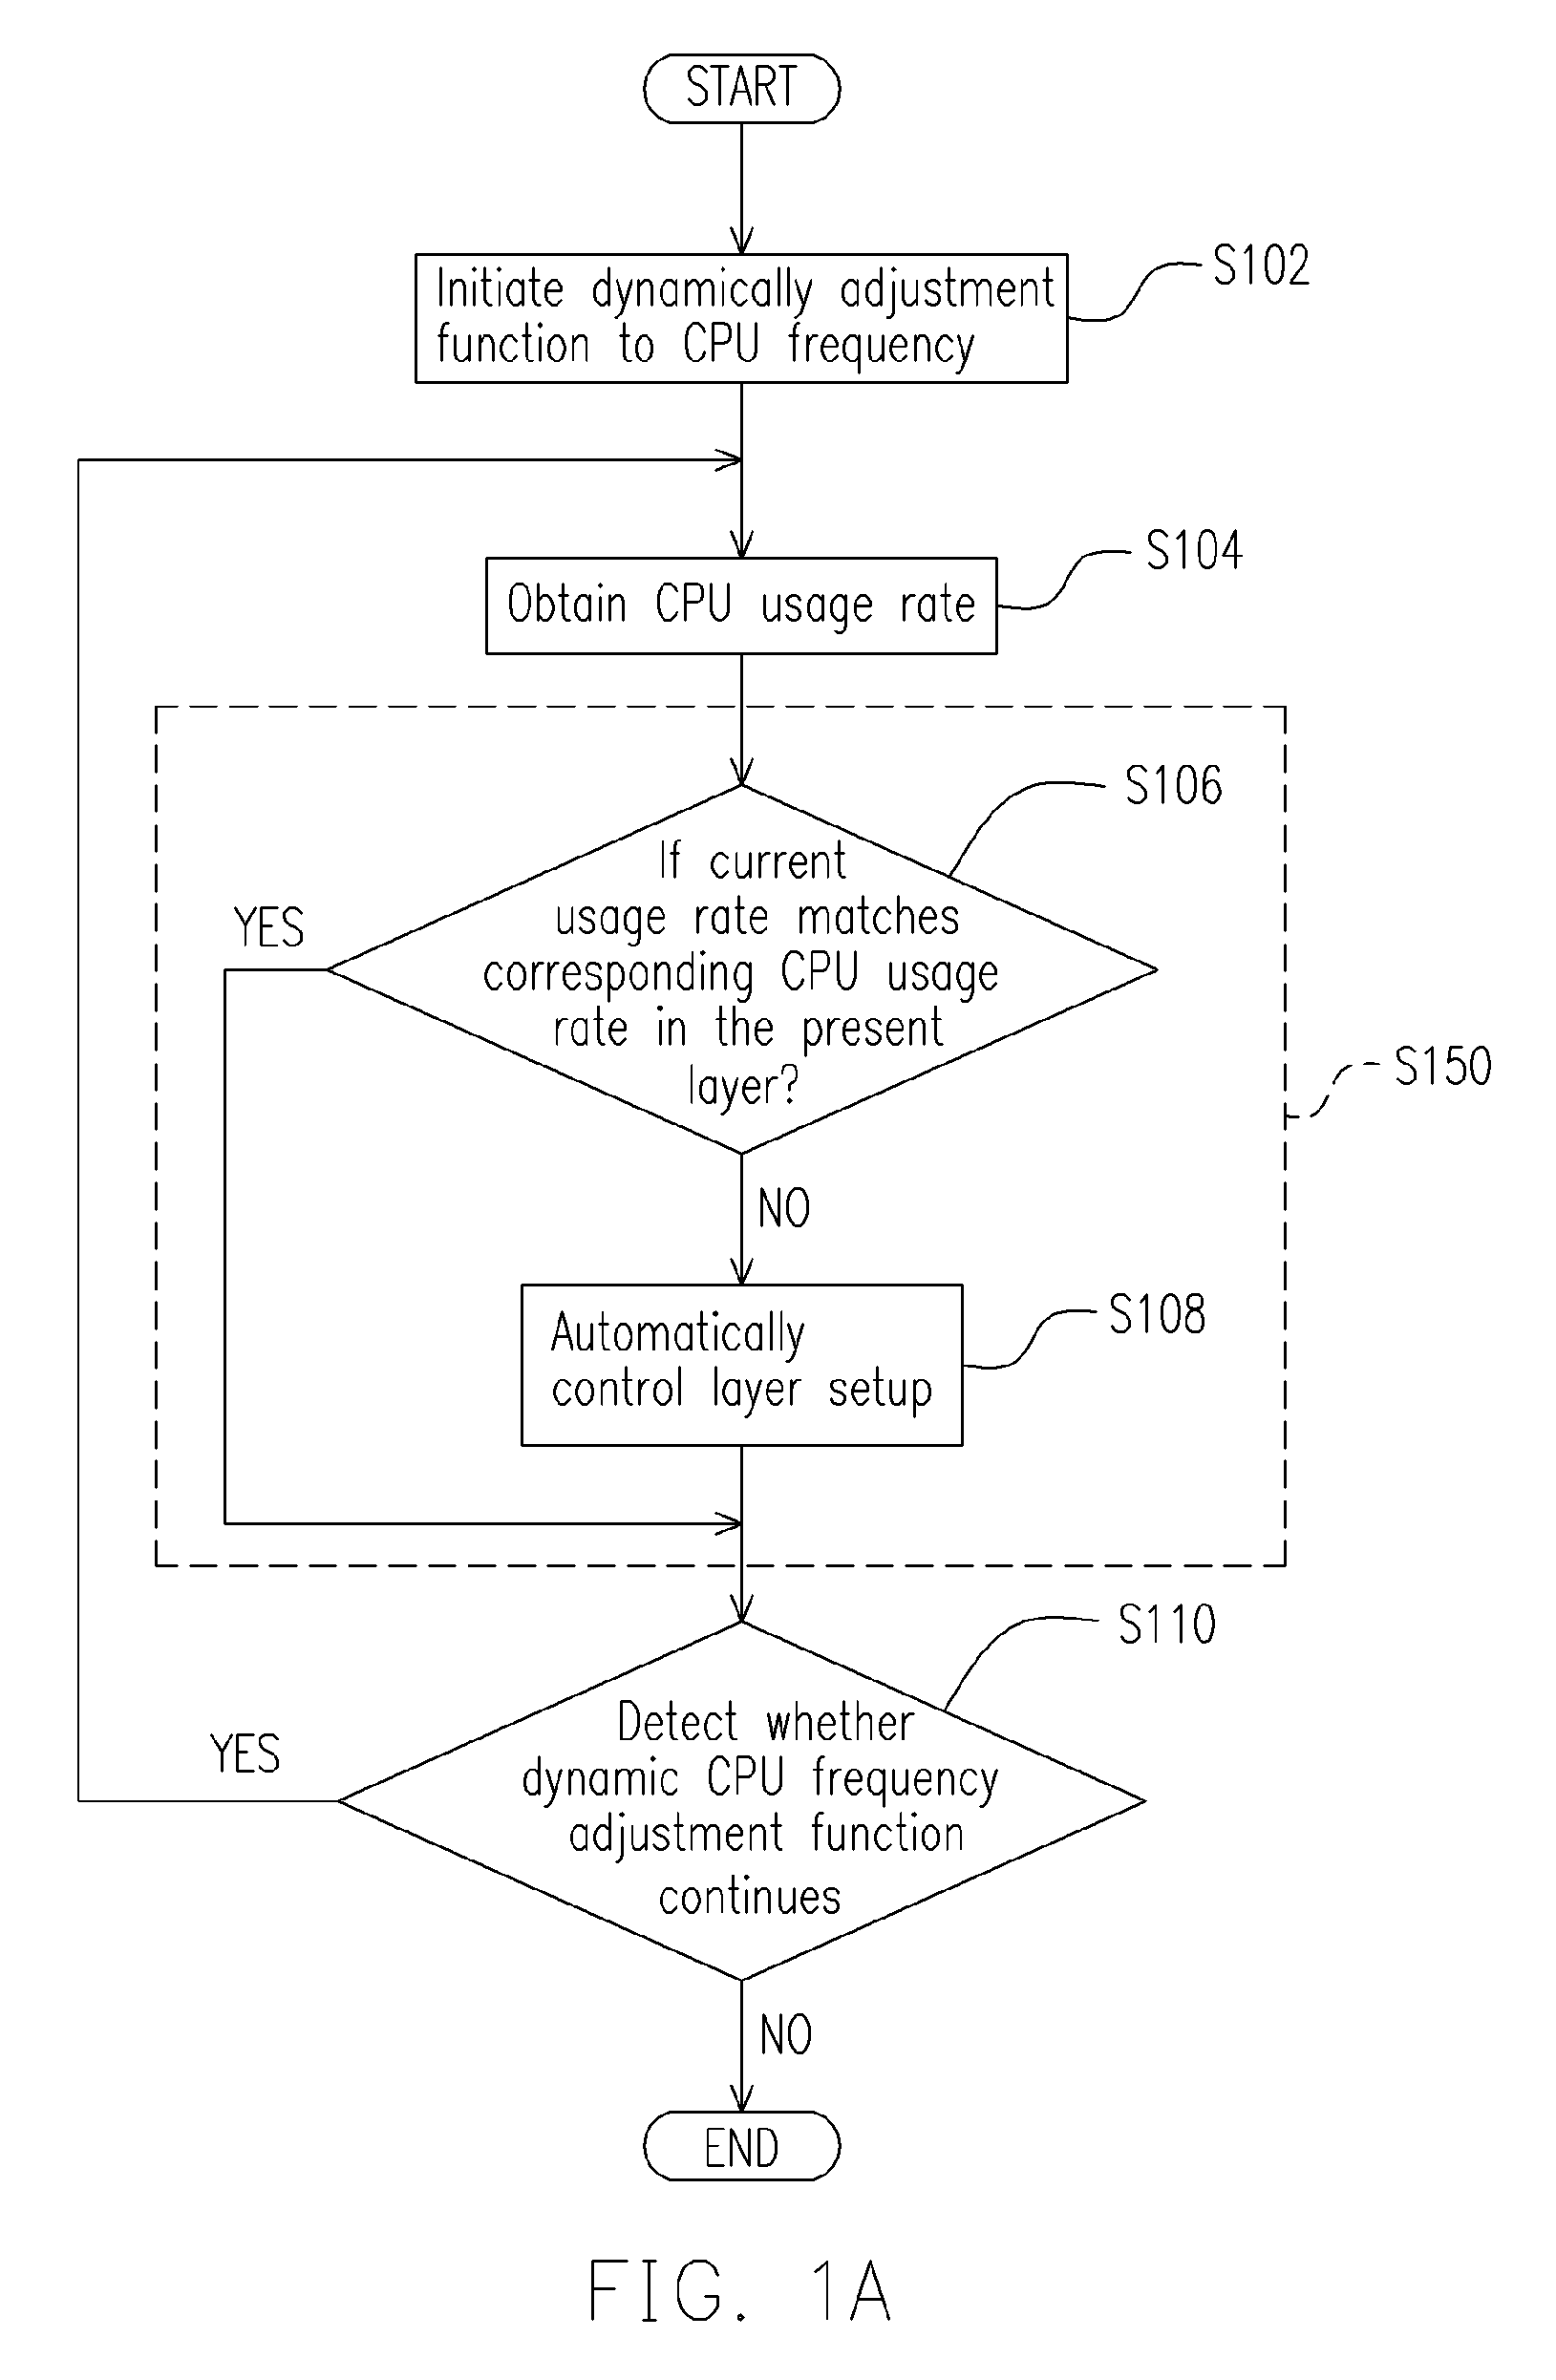 Method for adjusting a front-side bus frequency based on a processor usage rate stored in a translation table and generating the translation table if it does not exist